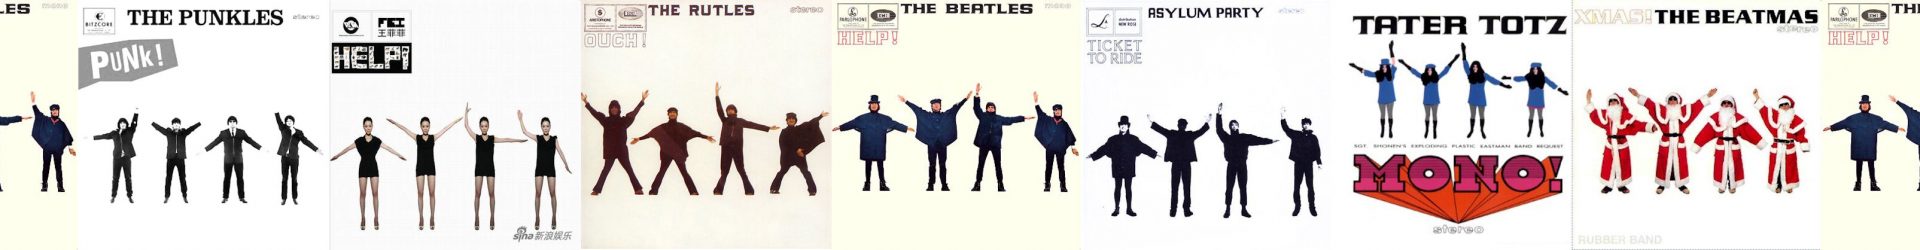 INI KAMOZE: Here Comes the Hotstepper – THE BEATLES: Come Together